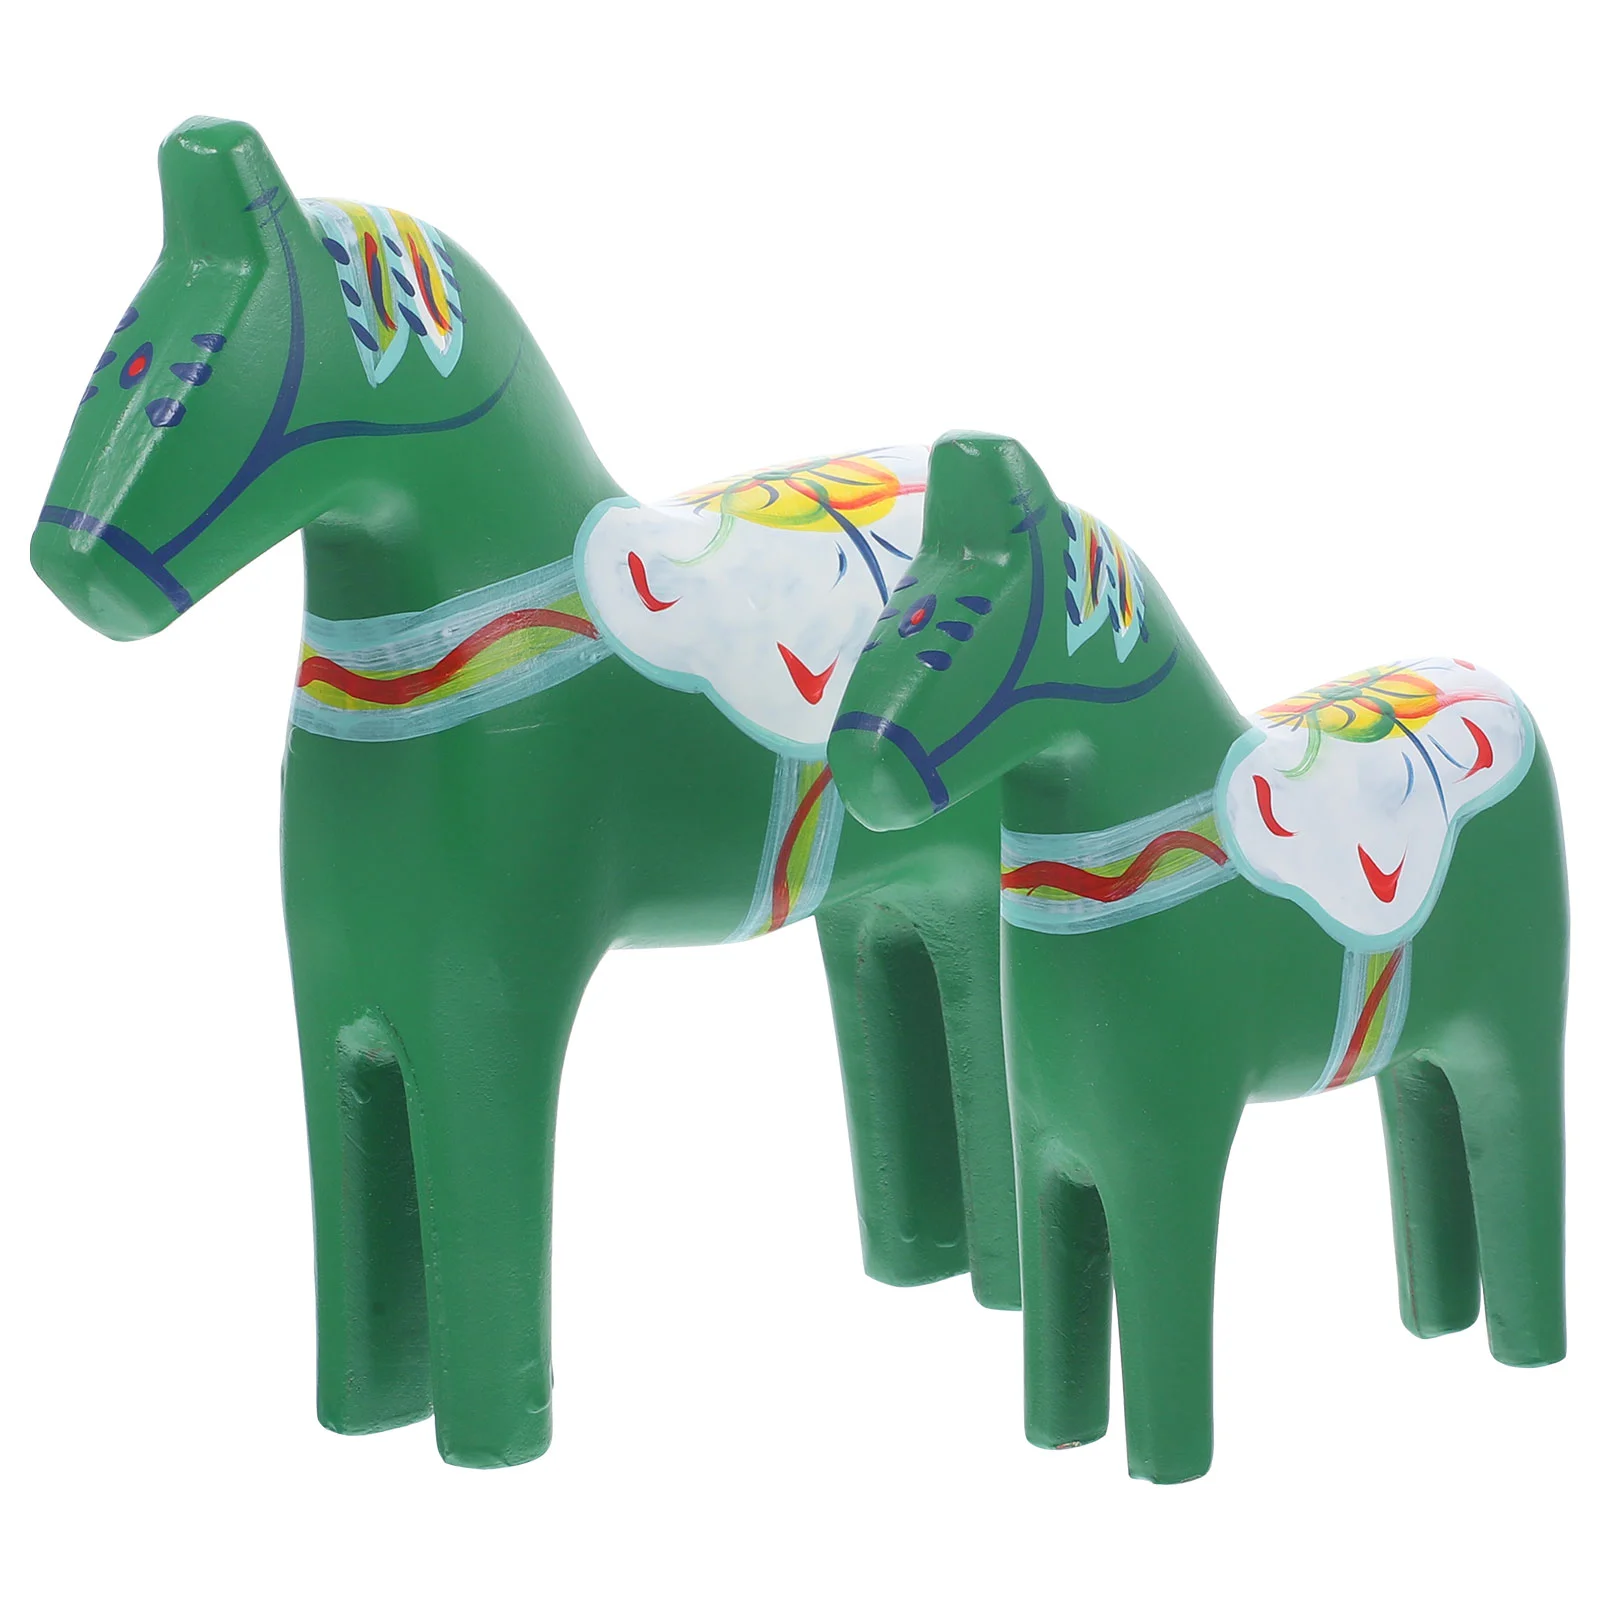 

Horse Wooden Figurine Swedish Decor Ornament Tabletop Statue Animal Lucky Sculpture Traditional Painted Hand Horses Dalarna